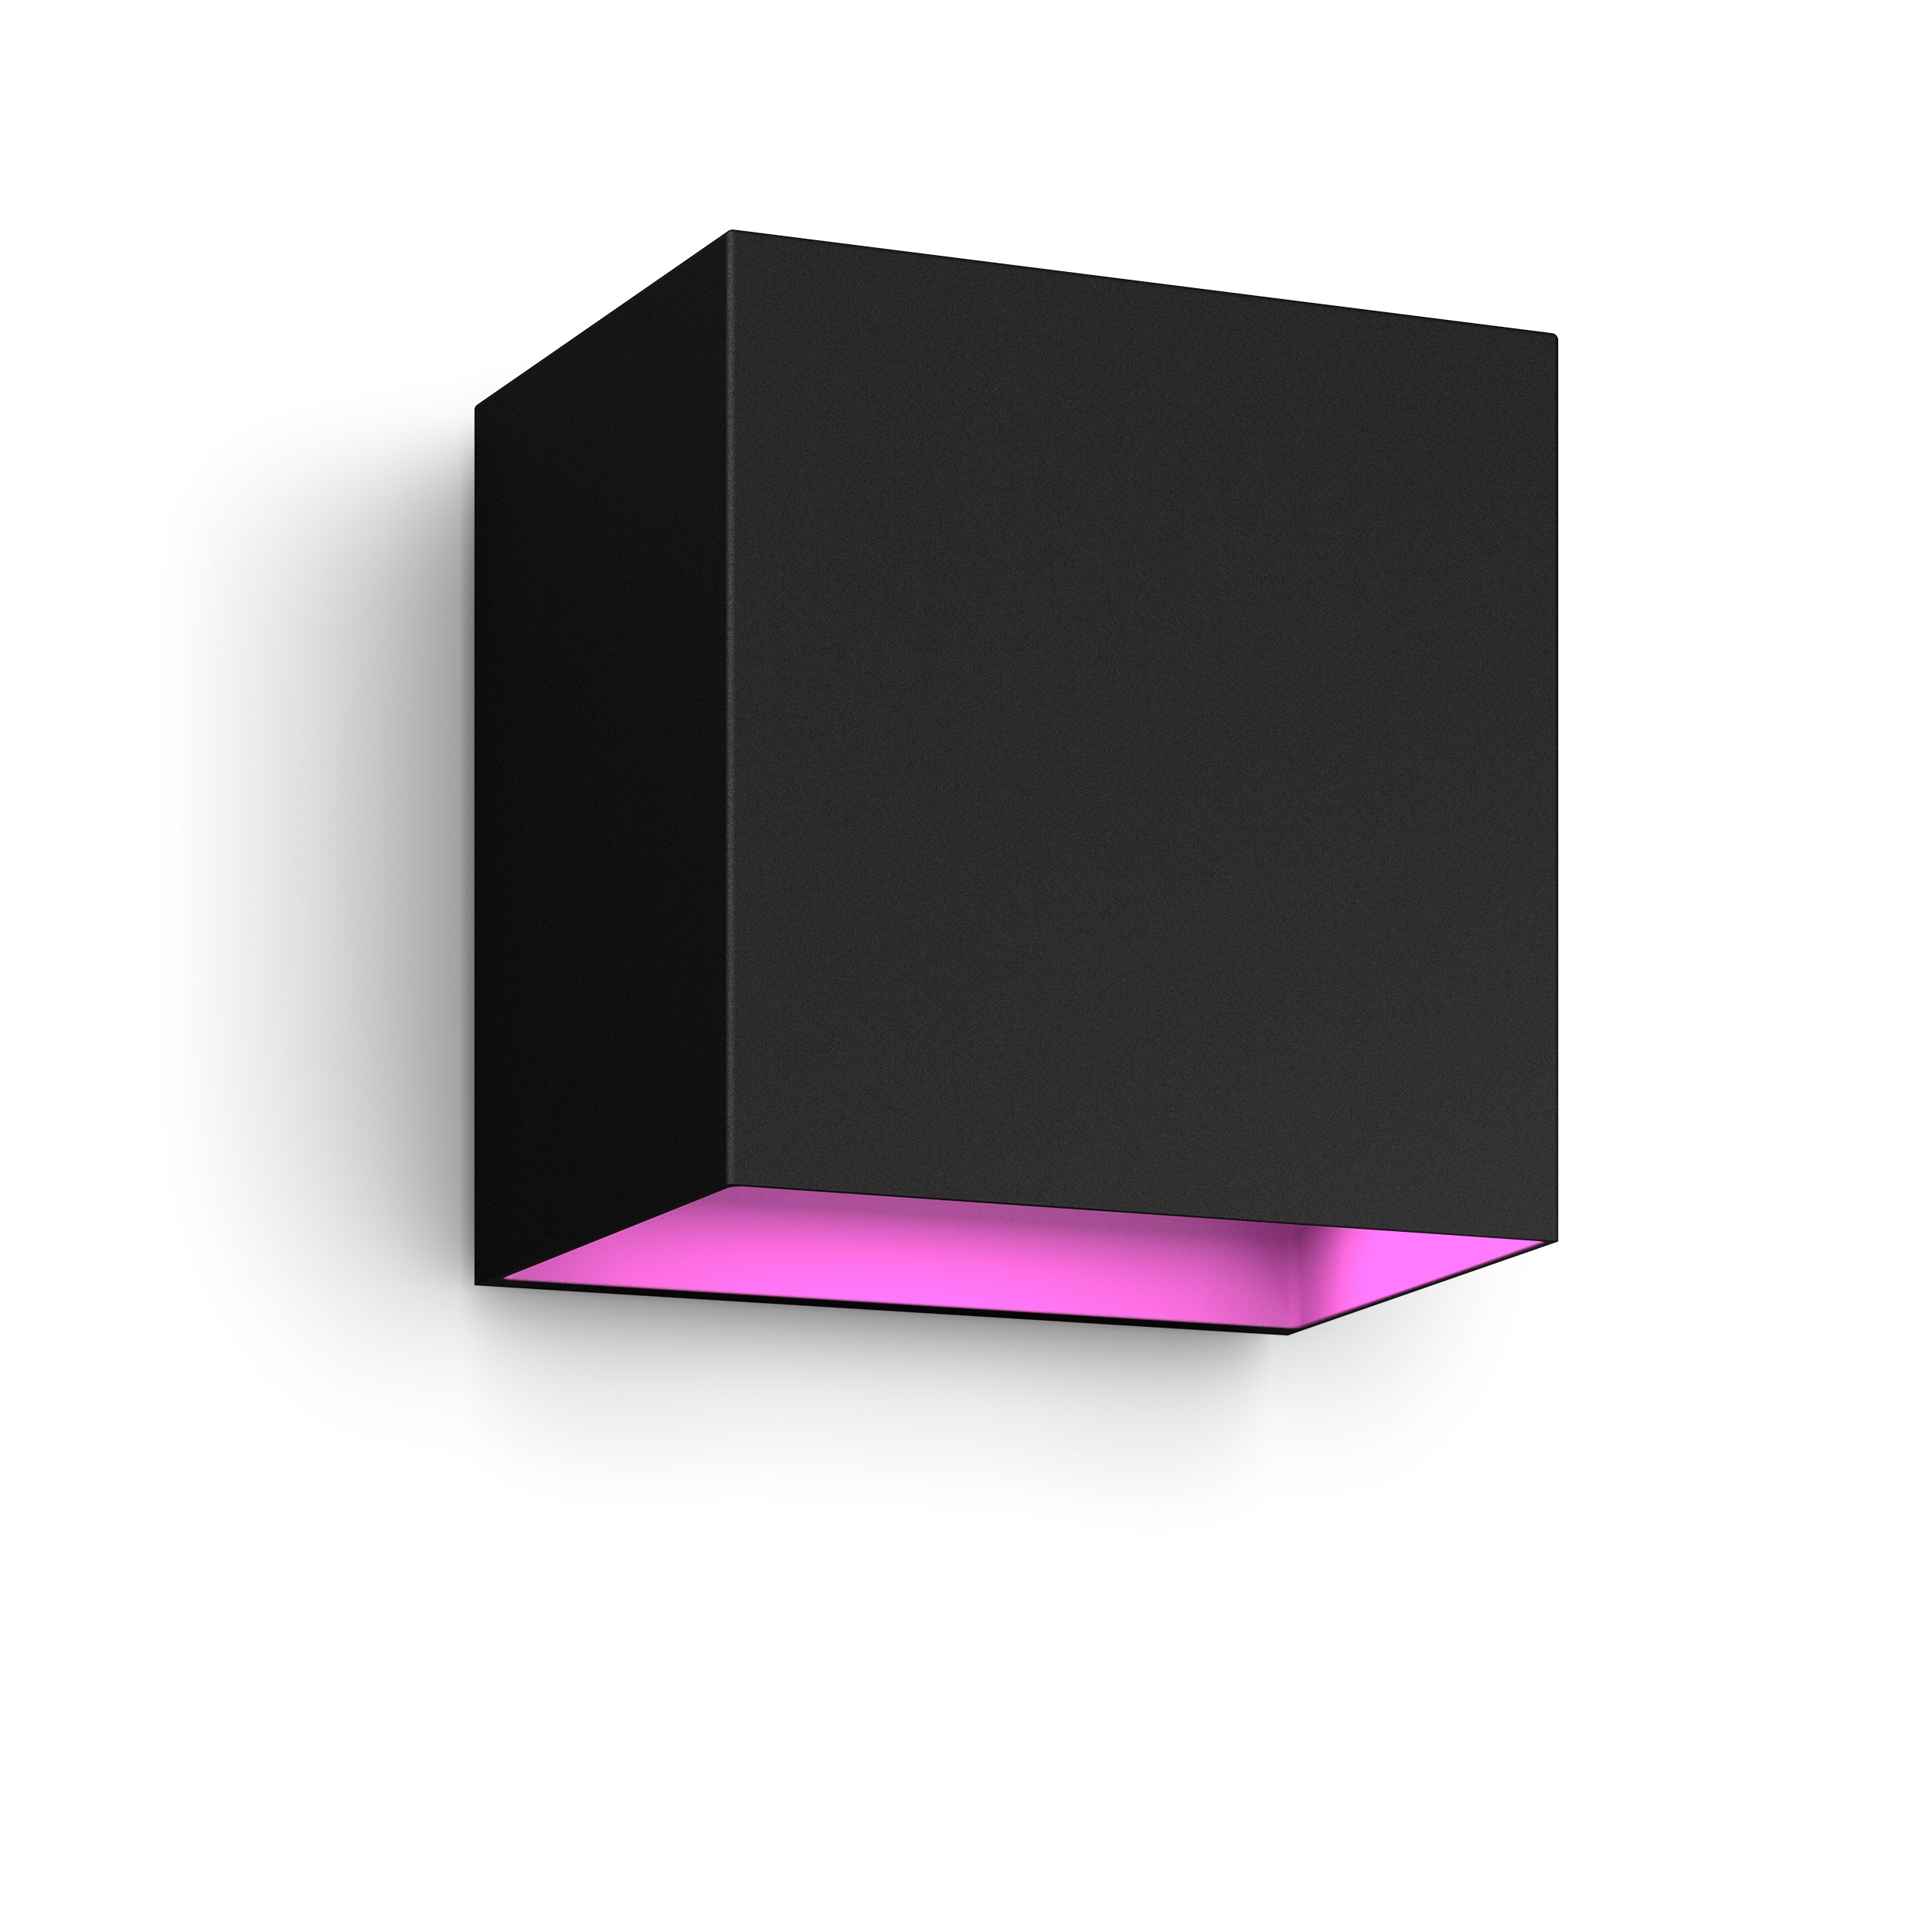 Philips Hue White & Color ++ Outdoor Cyberport Ambiance Resonate • Wandleuchte einstrahlig sw